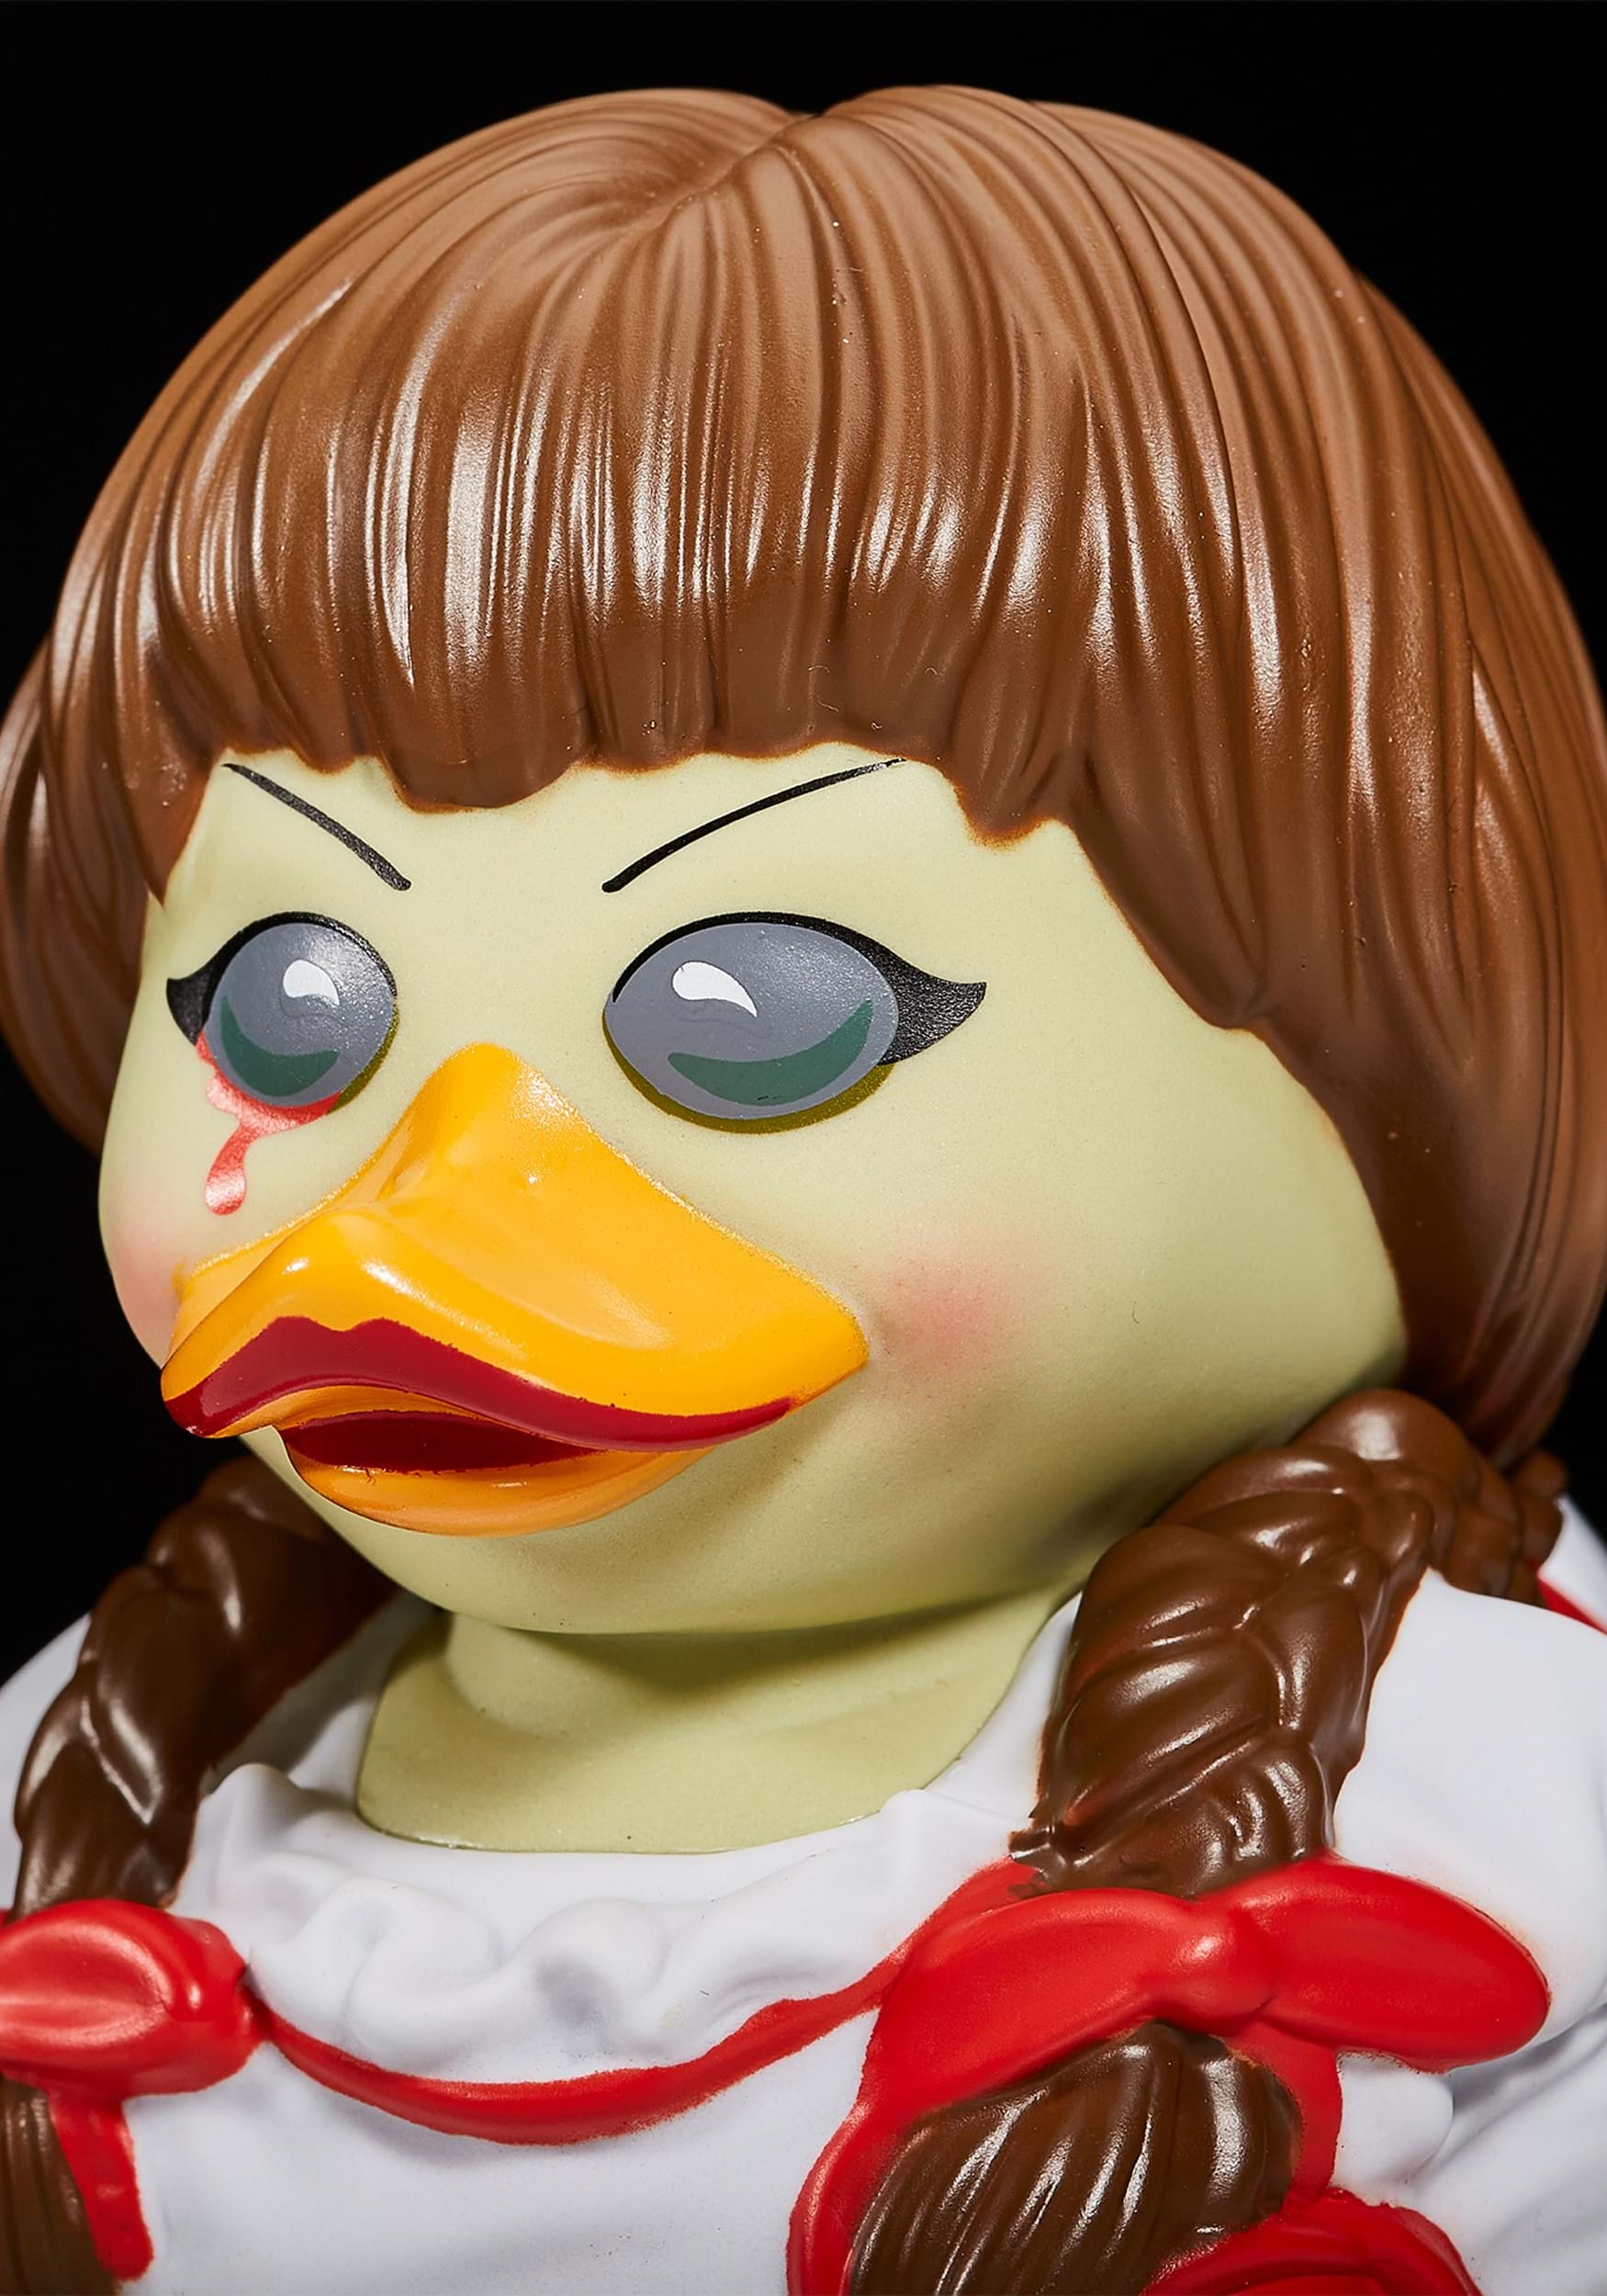 Annabelle TUBBZ Cosplay Duck , Annabelle Collectibles